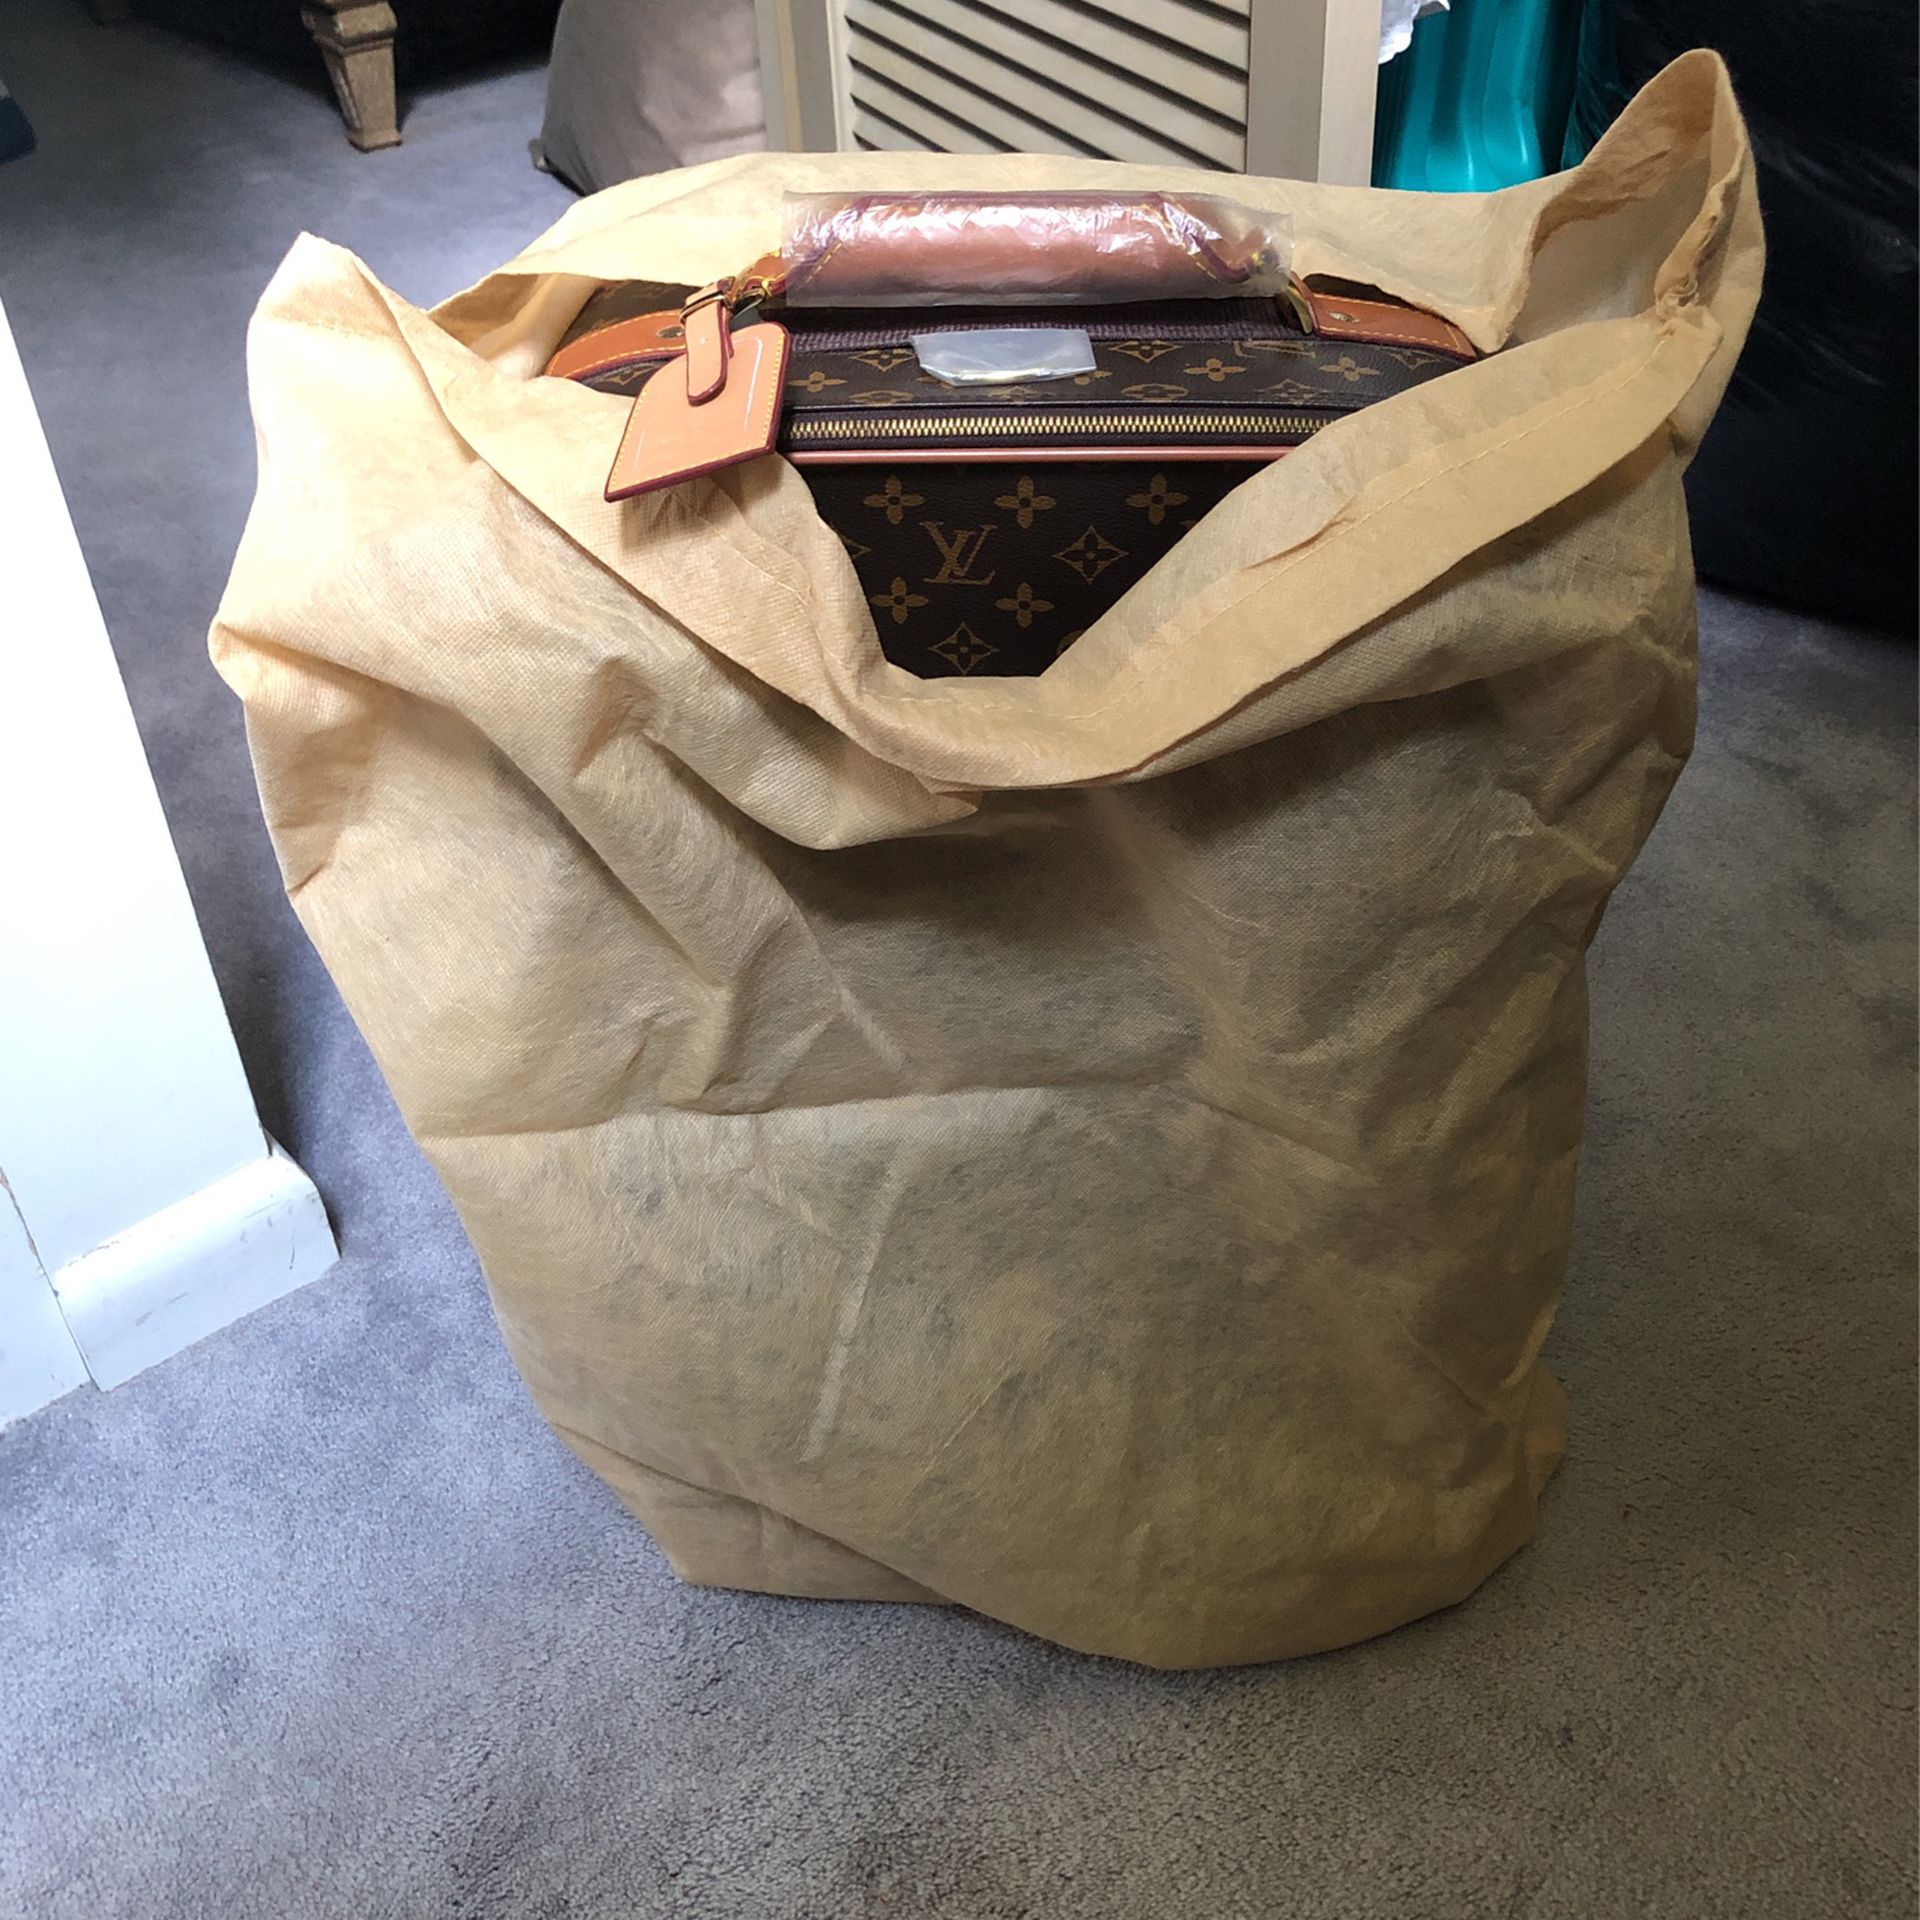 Louis Vuitton Cosmetic Bag for Sale in Nashville, TN - OfferUp